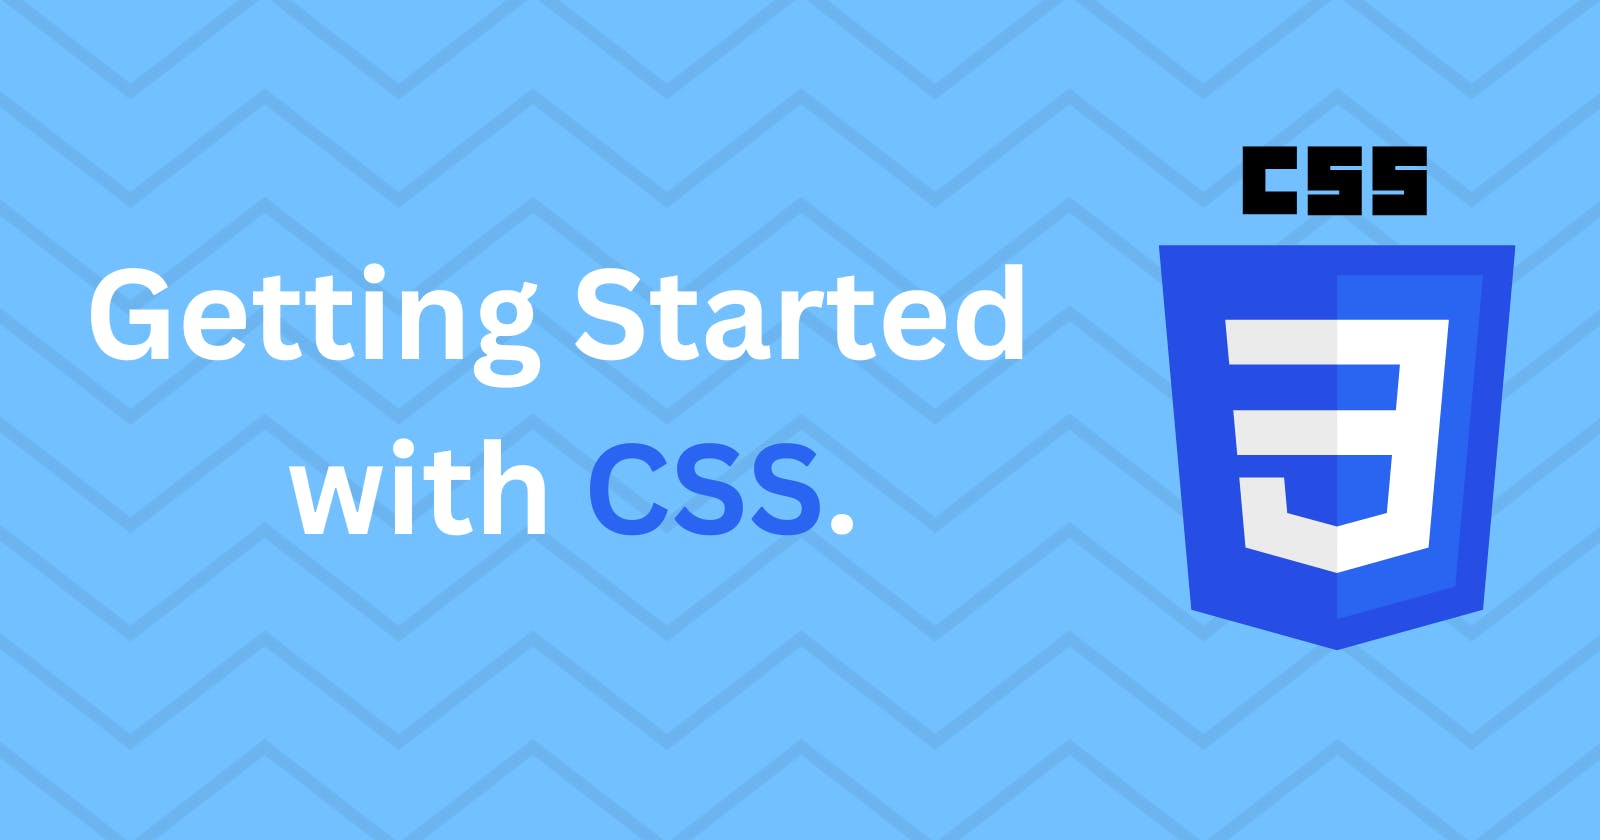 Getting Started with CSS.